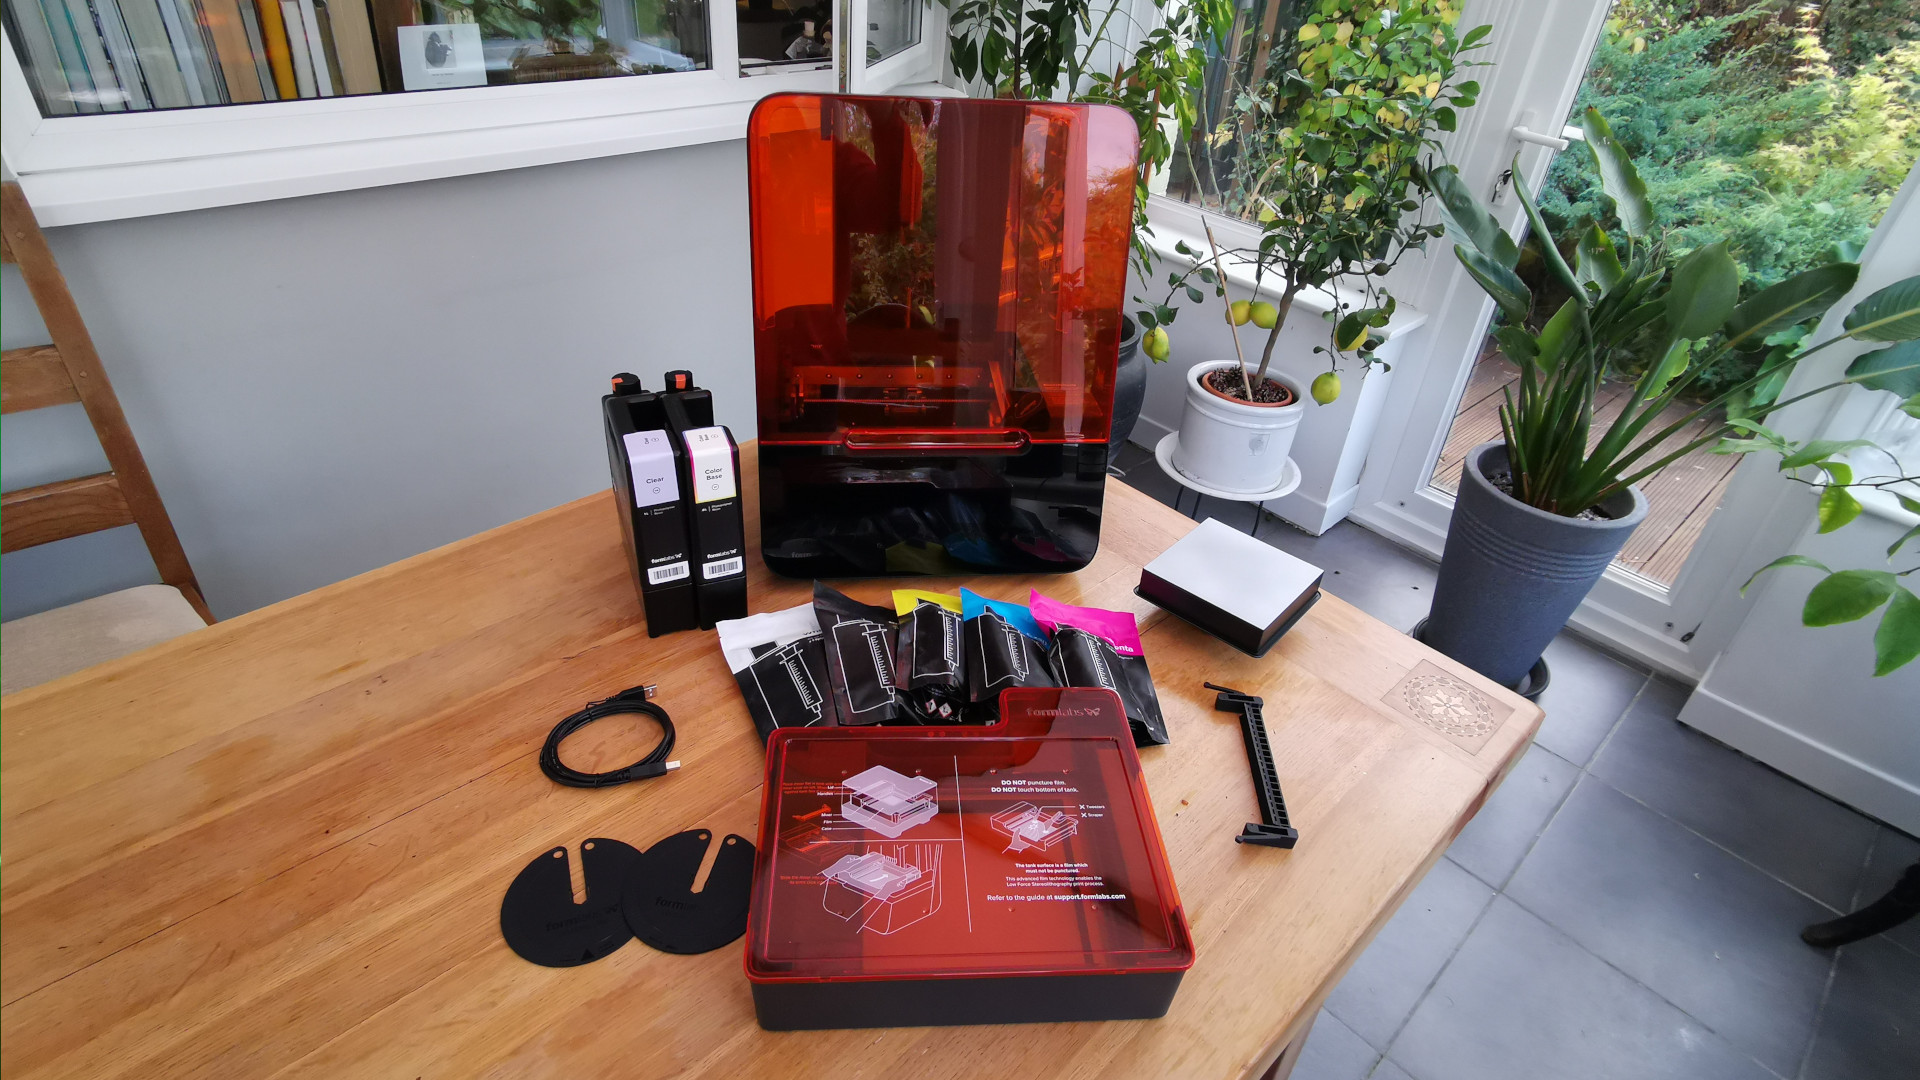 Create Your Own Color Resin with Formlabs' New Color Kit